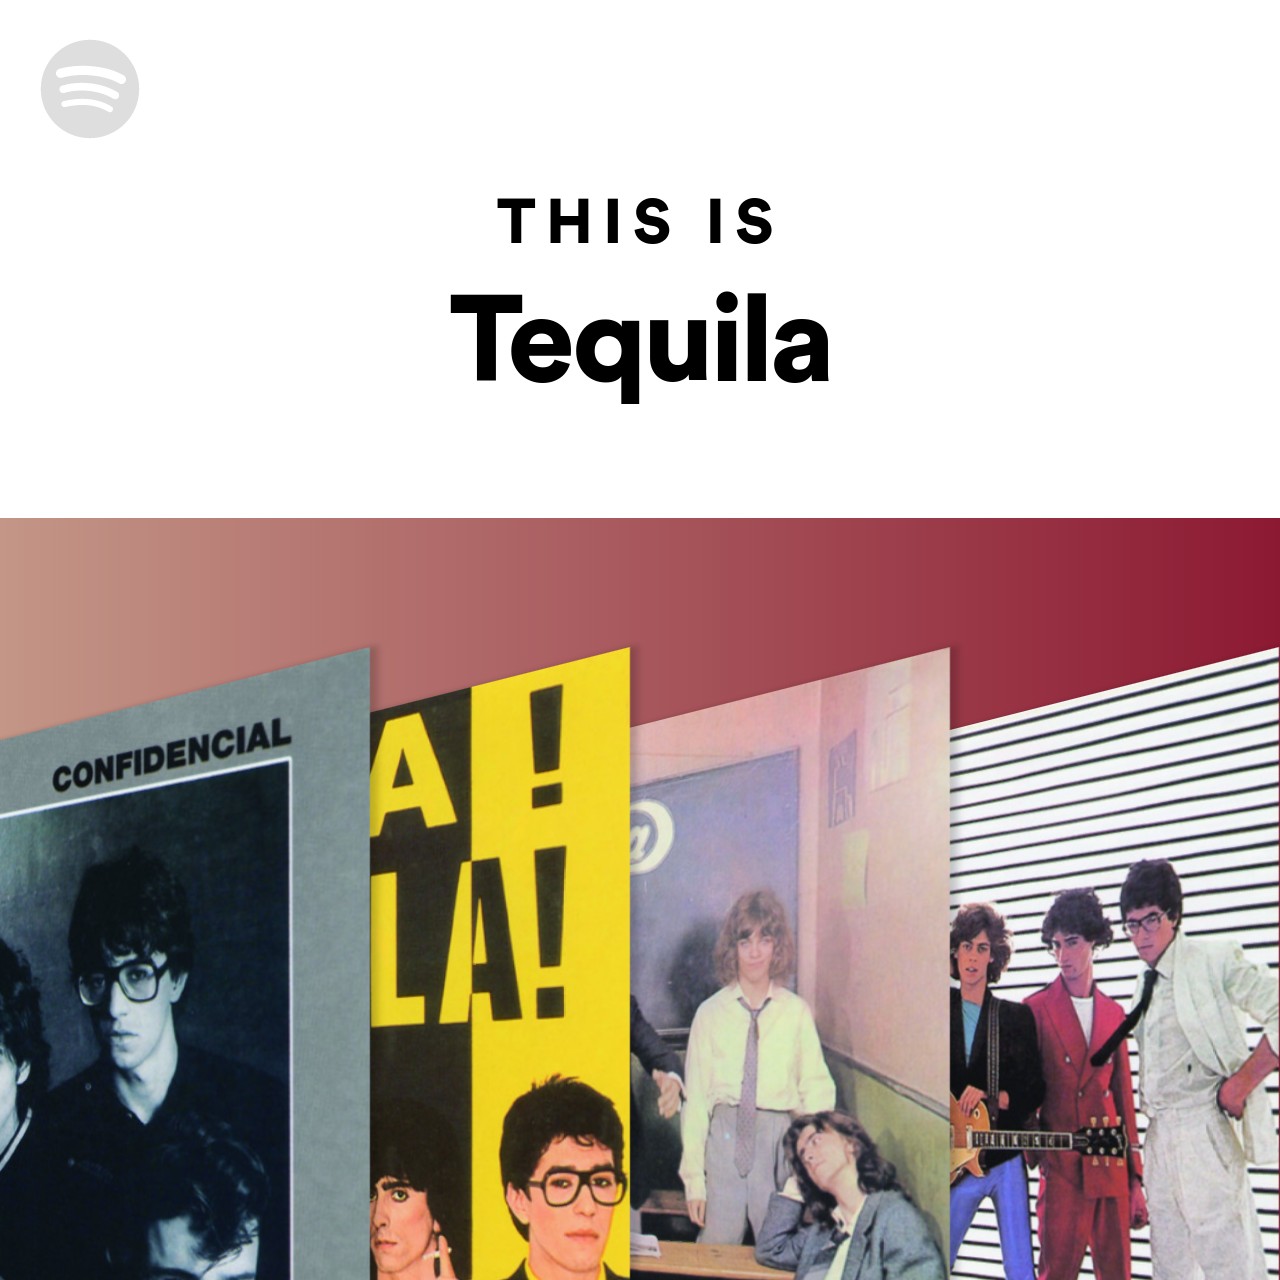 This Is Tequila